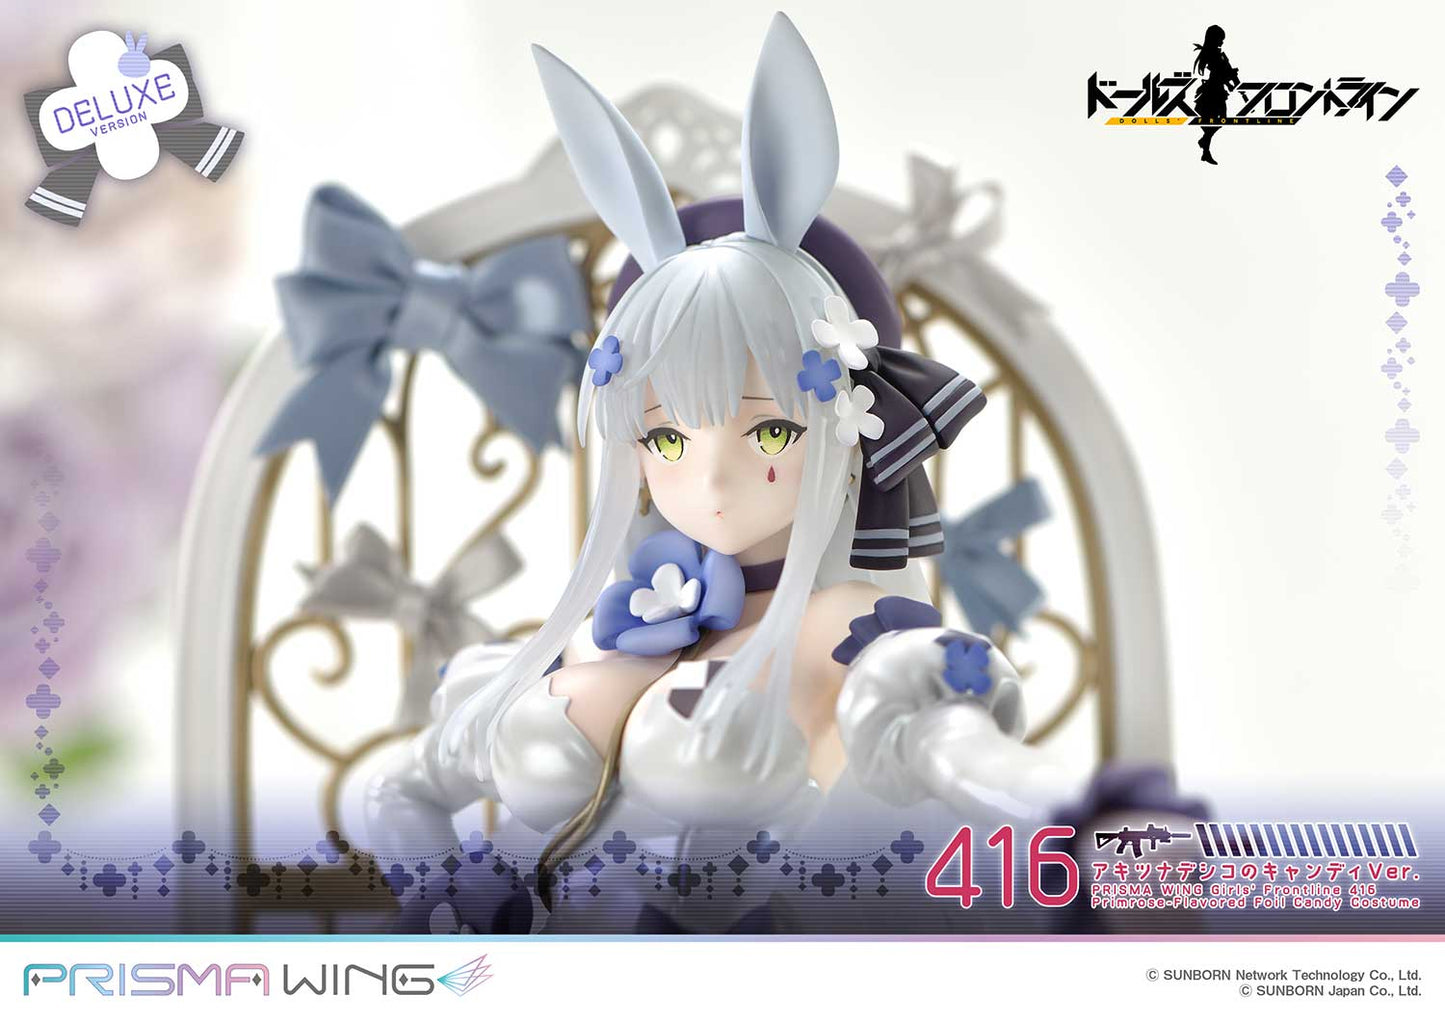 PRISMA WING "Girls' Frontline" 416 Primrose - Flavored Foil Candy Ver. DX Edition 1/7 Scale Figure | animota